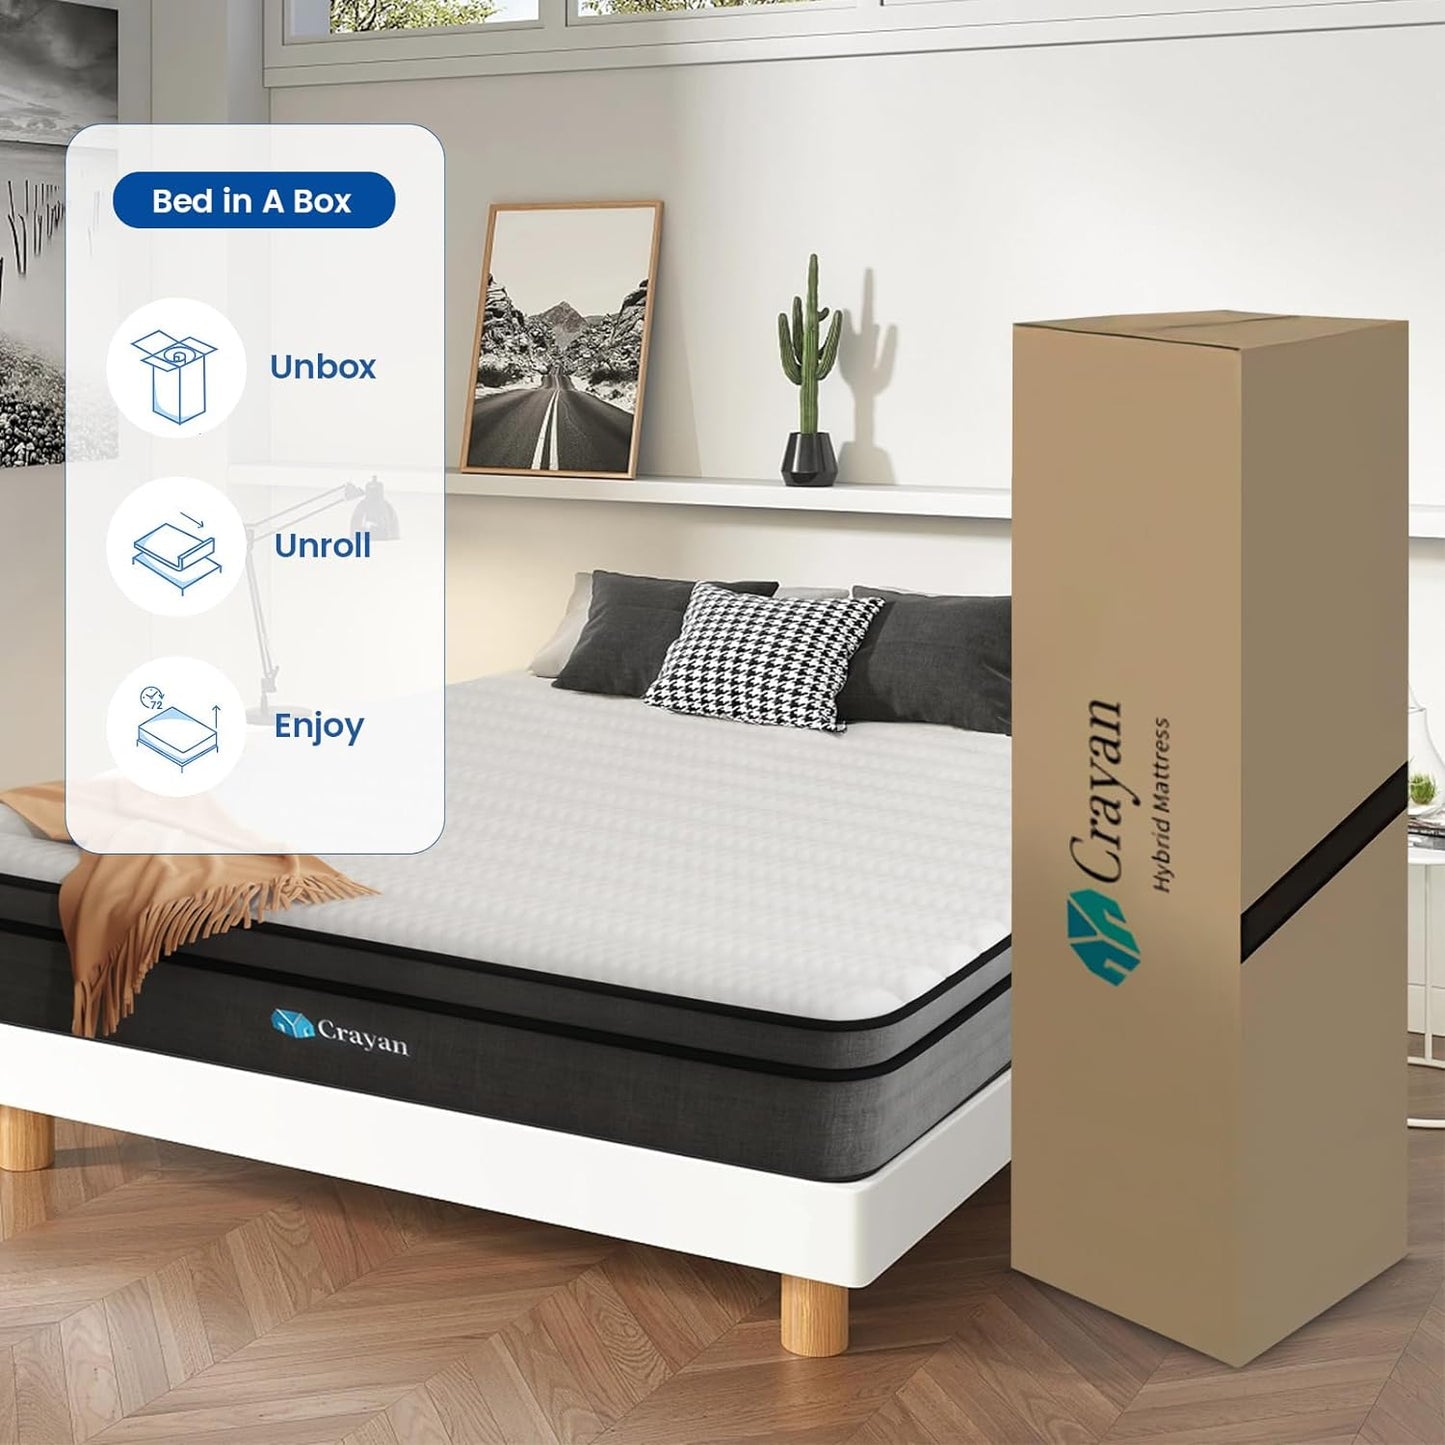 Crayan Queen Mattress, 12 Inch Memory Foam Mattress Queen Size, Innerspring Hybrid Mattress in a Box with Motion Isolation & Strong Edge Support & Pressure Relief, CertiPUR-US - Retail $228